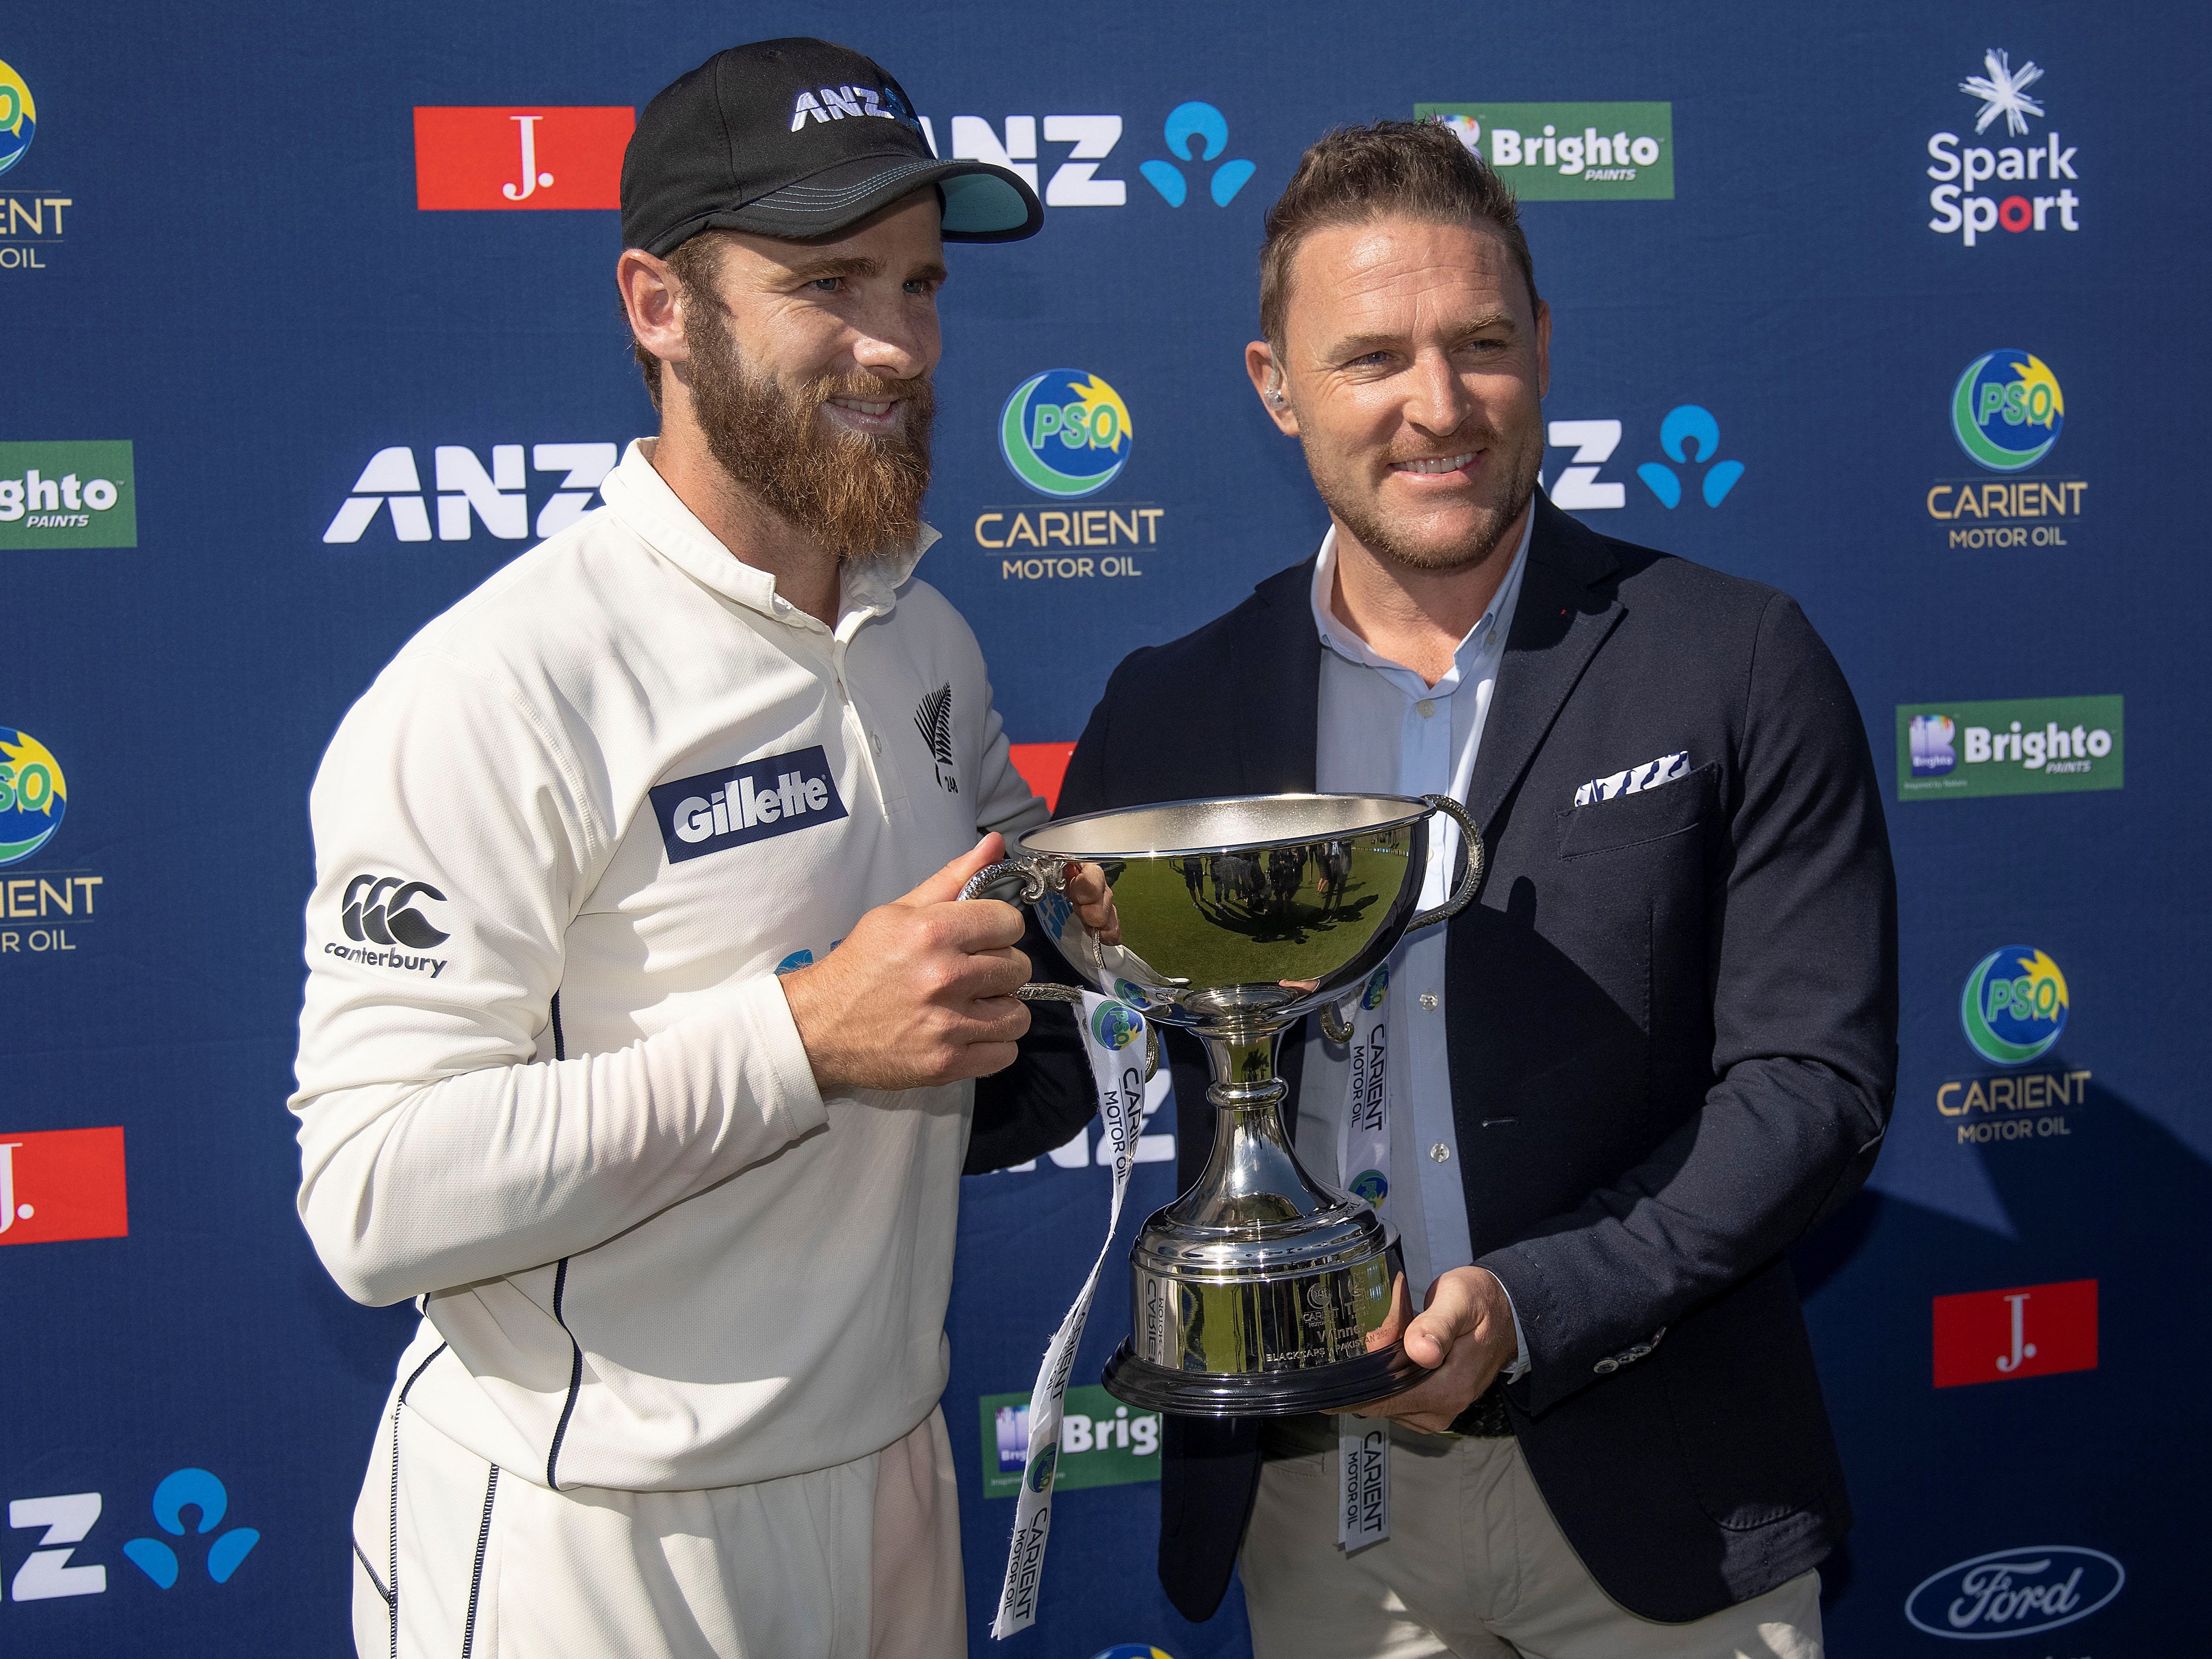 McCullum help set New Zealand on course for their current success under Kane Williamson